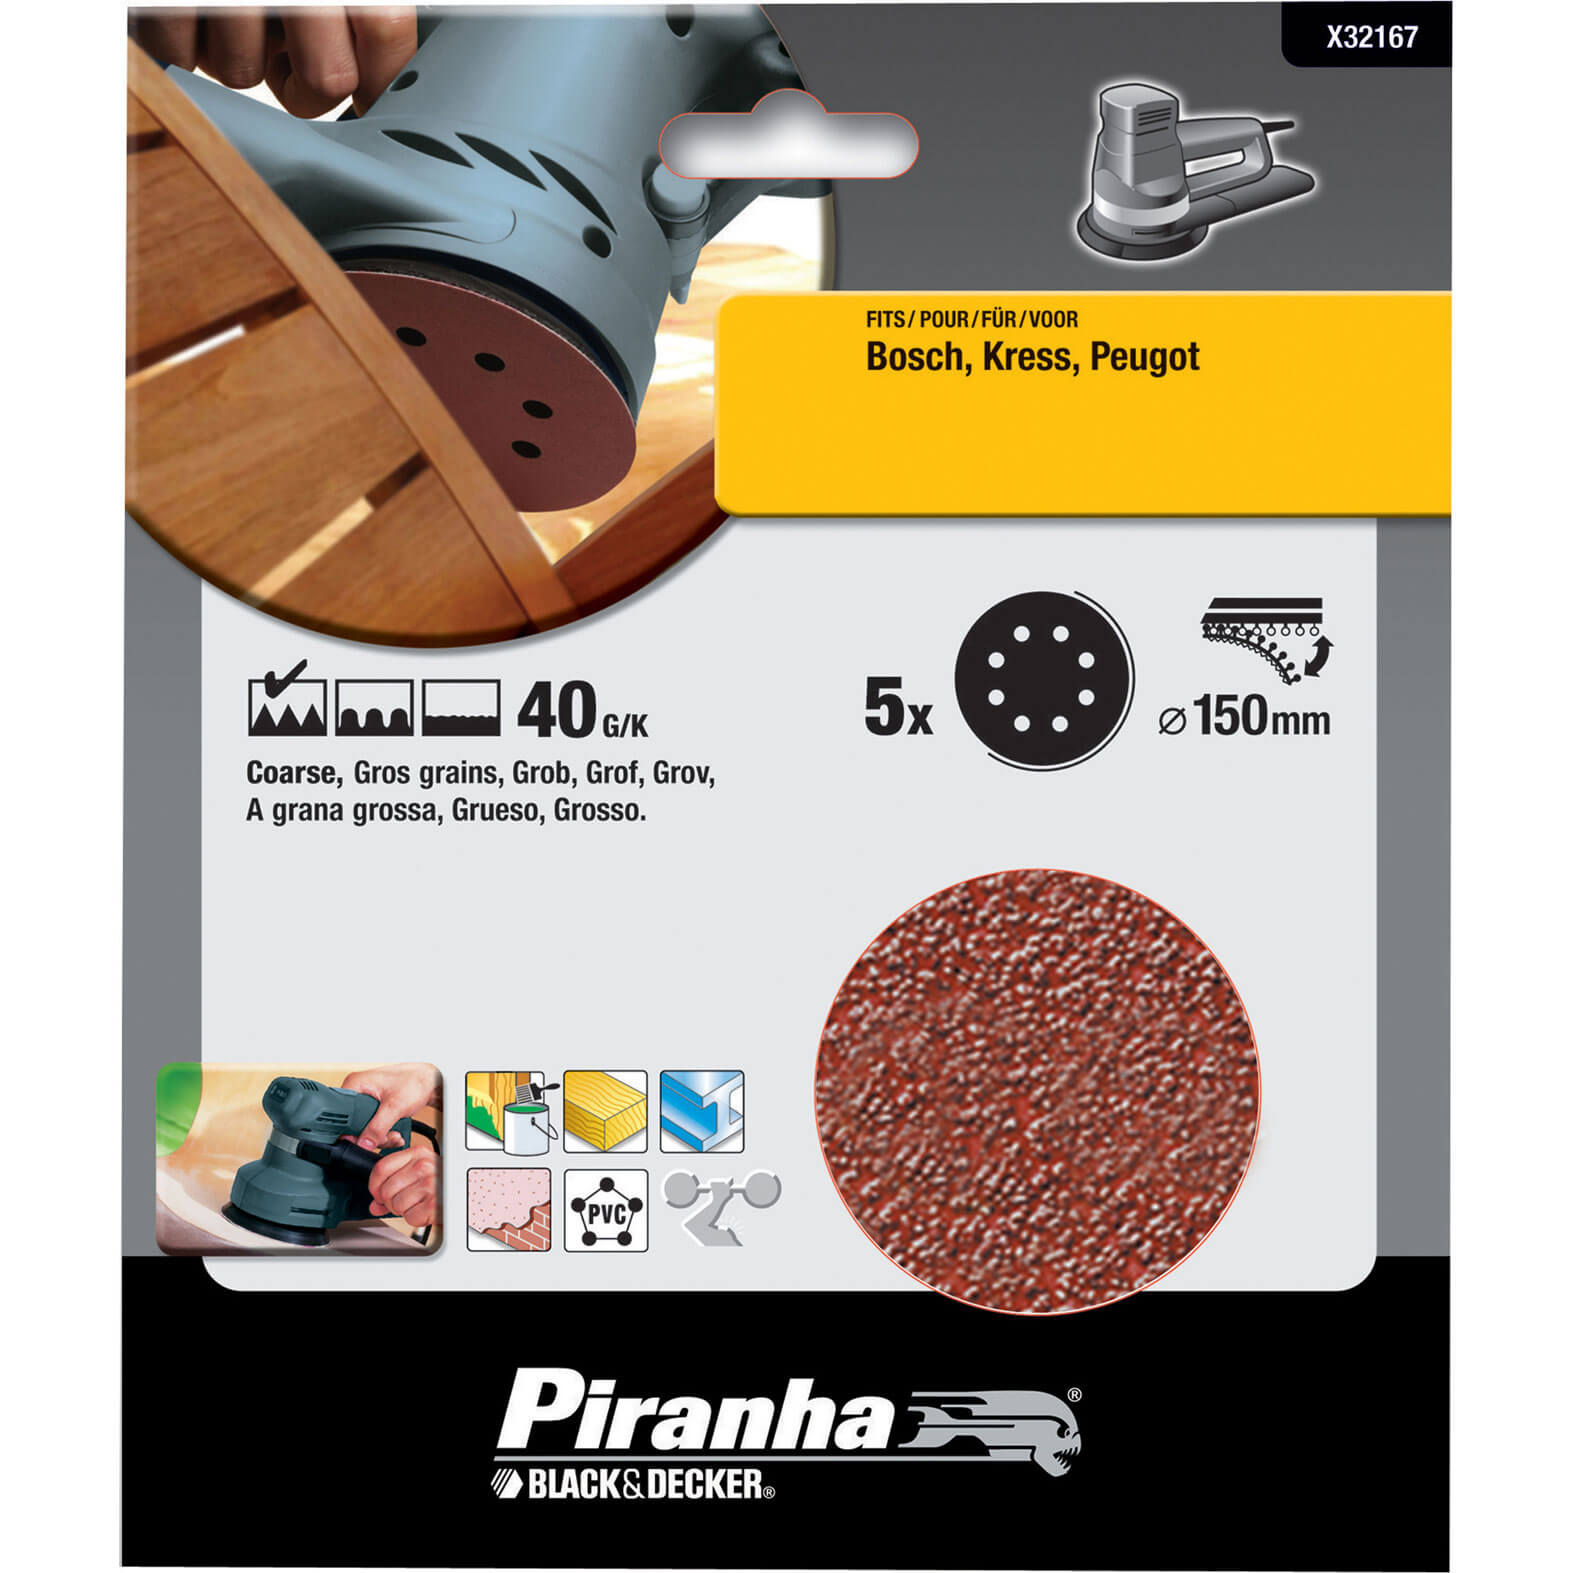 Image of Black and Decker Piranha Quick Fit ROS Sanding Discs 115mm 115mm 40g Pack of 5